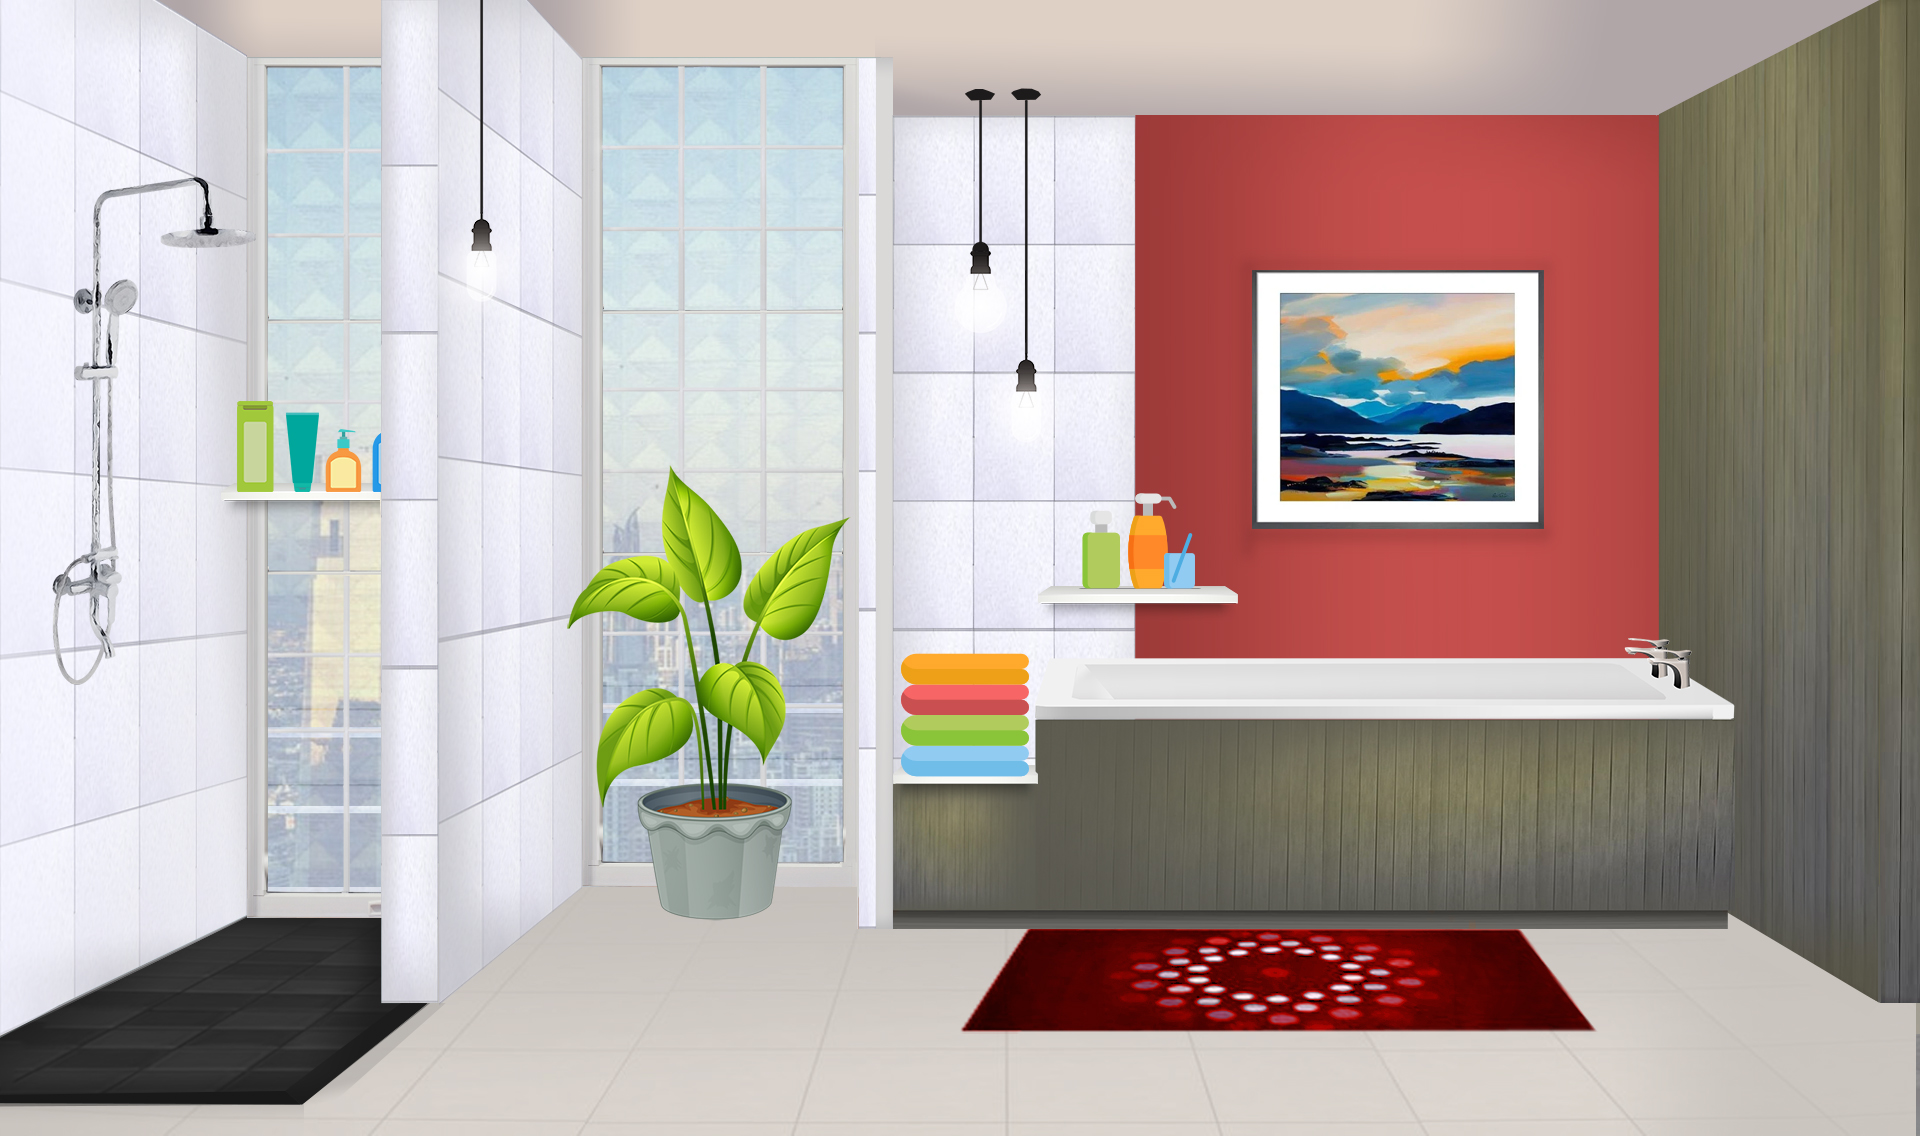 INT. RED BATHROOM DECORATED – DAY